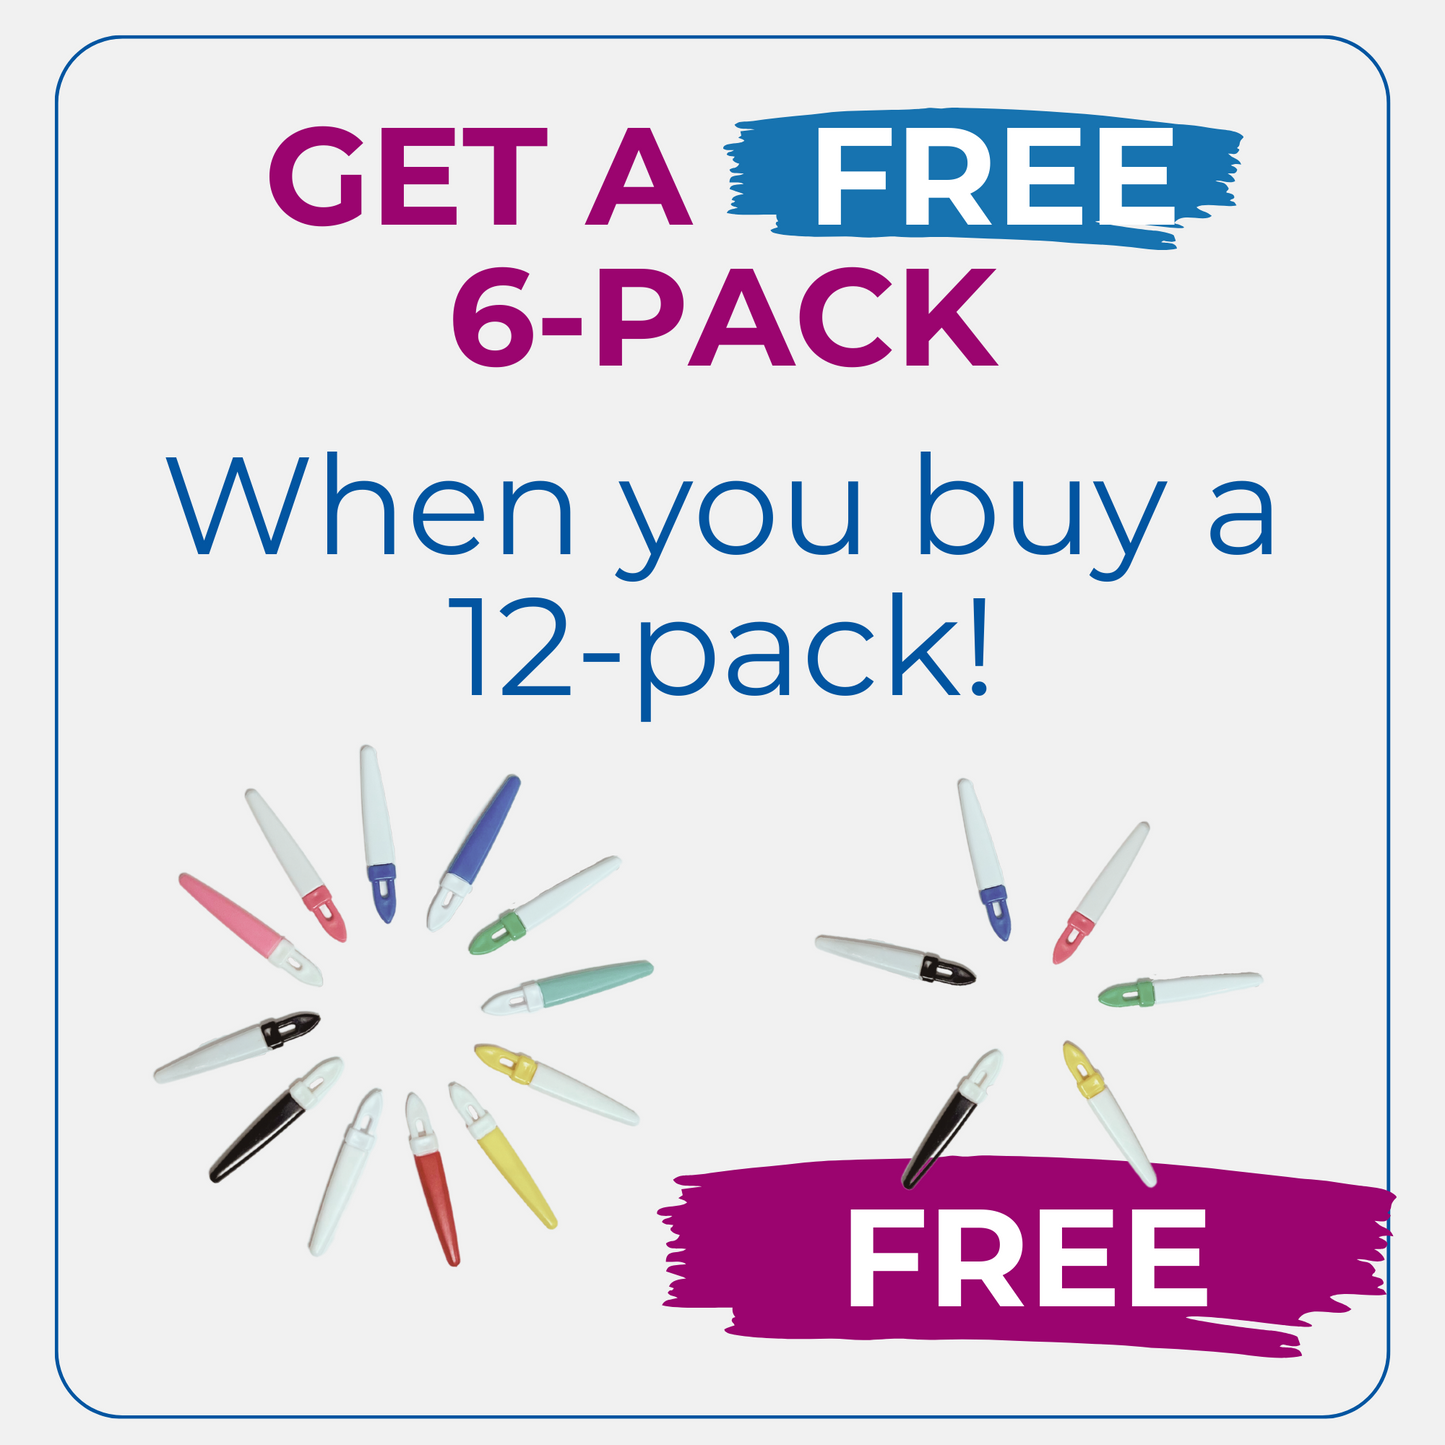 Get a FREE 6-Pack When You Buy a 12-Pack!